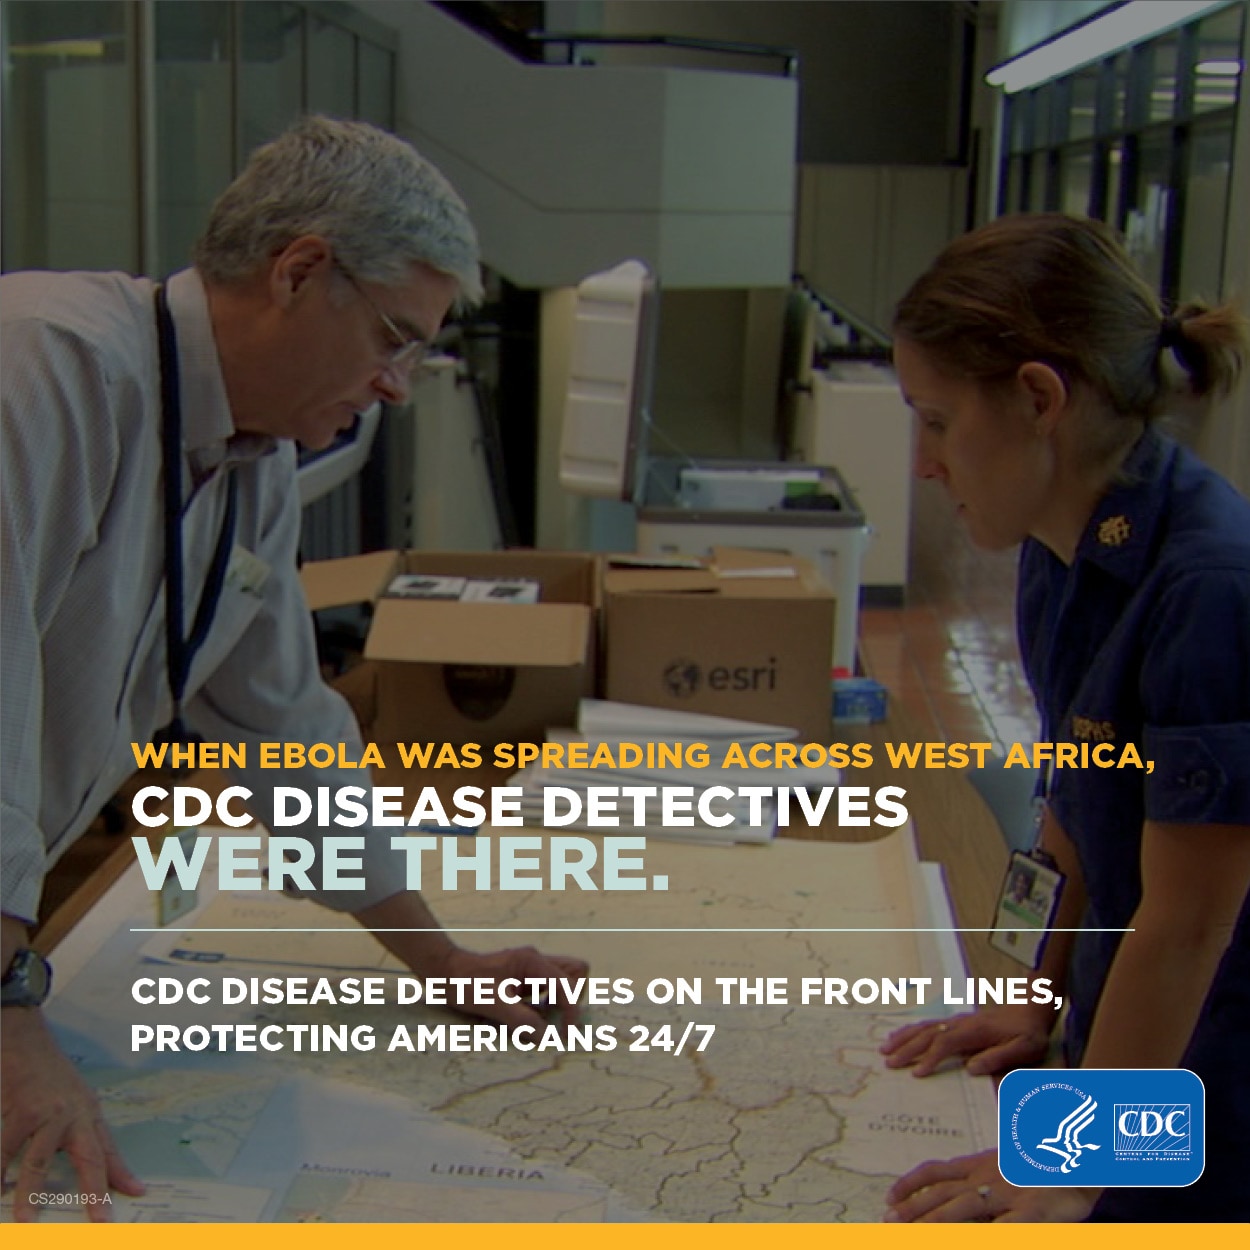 When Ebola was spreading across West Africa, CDC disease detectives were there.